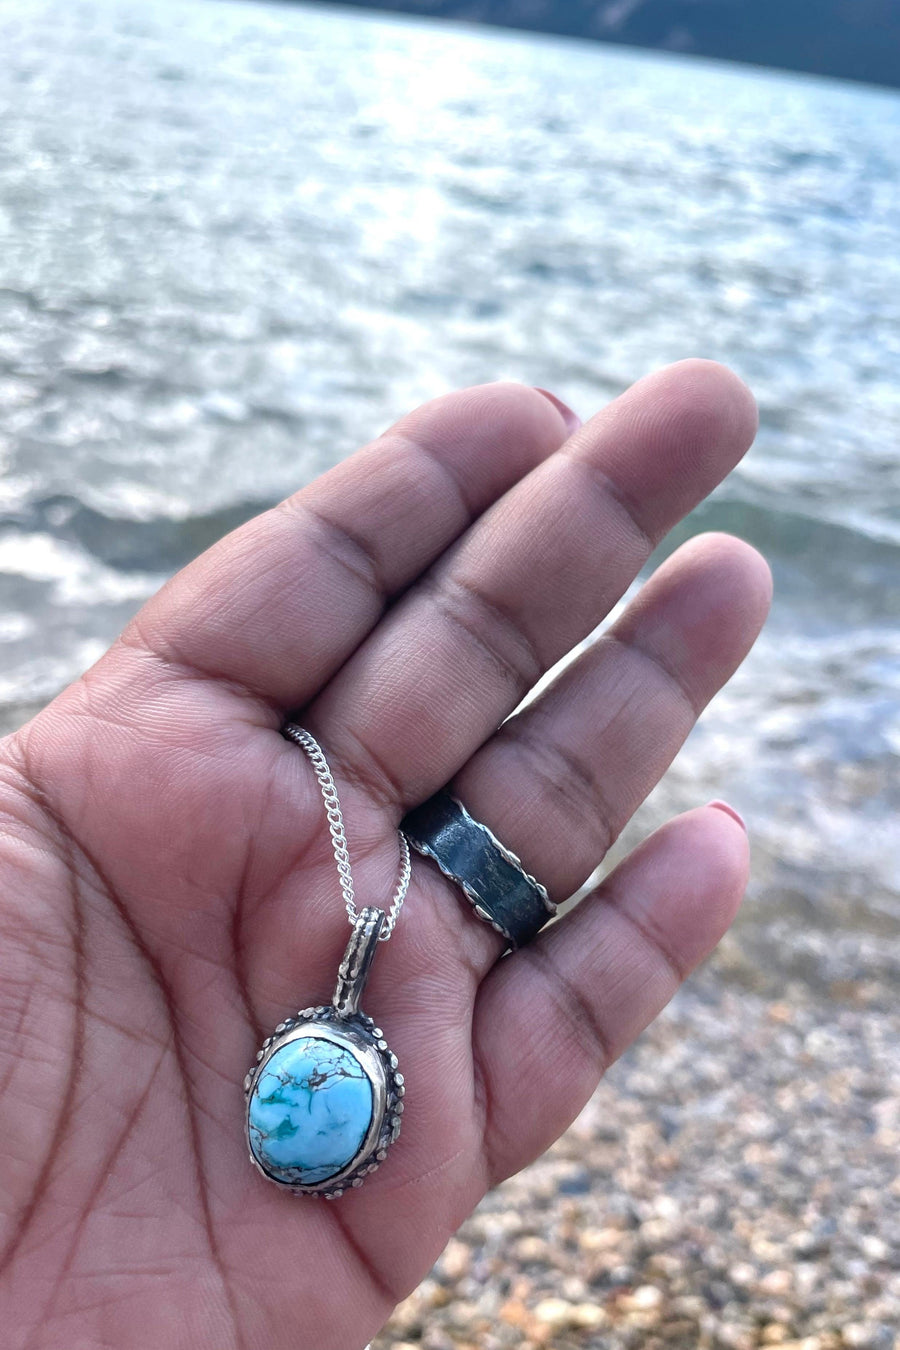 Arizona Turquoise Sterling Silver Necklace - Sand and Snow Jewelry - Necklaces - One of a Kind